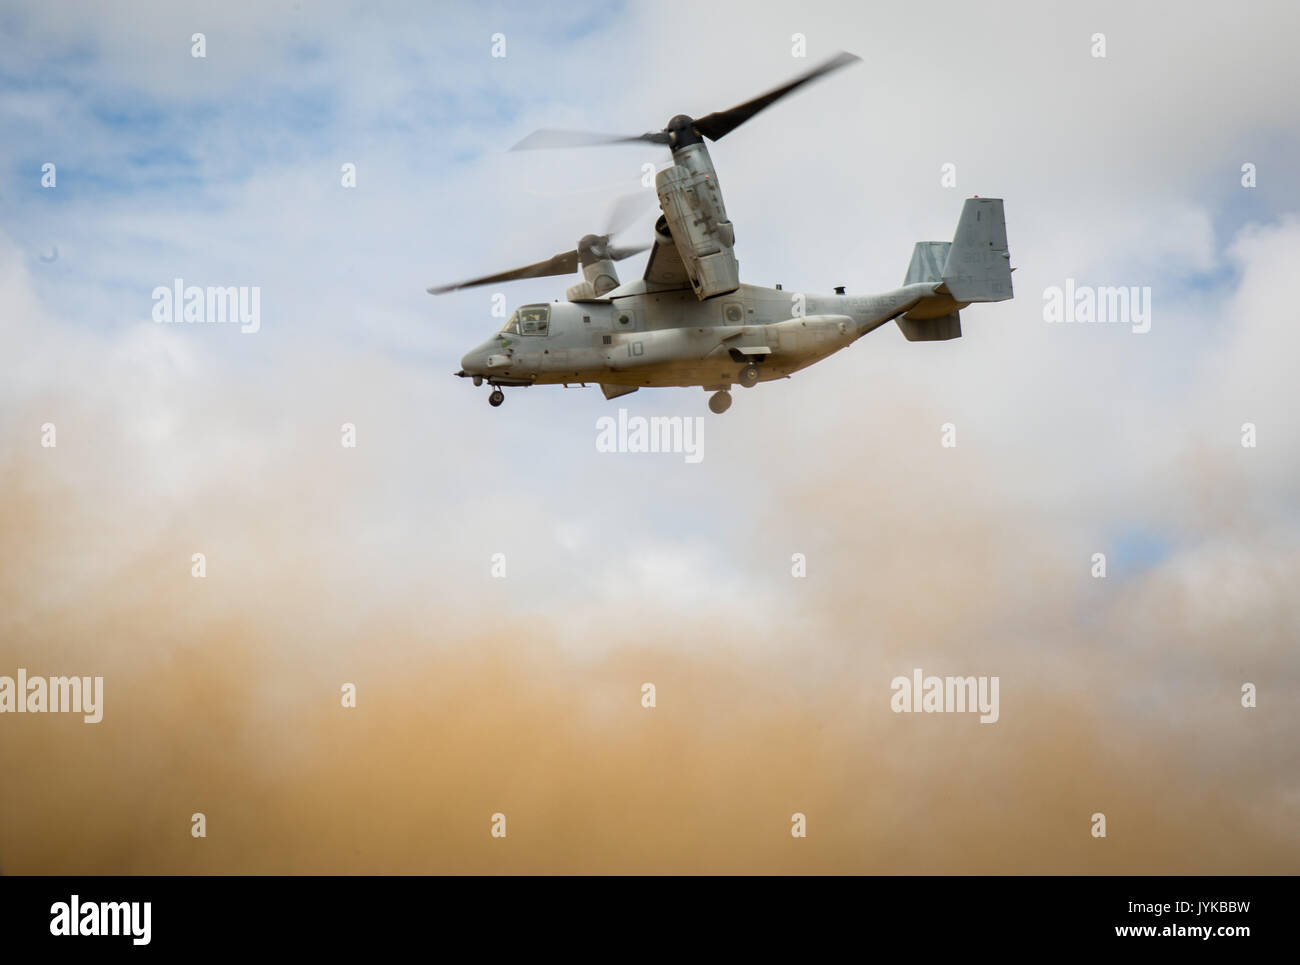 A U.S. Marine Corps MV-22 Osprey soars through the skies over Hokkaido, Japan, August 18, 2017, in support of Northern Viper 2017. This exercise tests the interoperability and bilateral capability of the Japan Ground Self-Defense Force and U.S. Marine Corps forces to work together and provides the opportunity to conduct realistic training in an unfamiliar environment. This combined-joint exercise is held to enhance regional cooperation between participating nations to collectively deter security threats. The aircraft is assigned to Marine Medium Tiltrotor Squadron 262, Marine Aircraft Group 36 Stock Photo